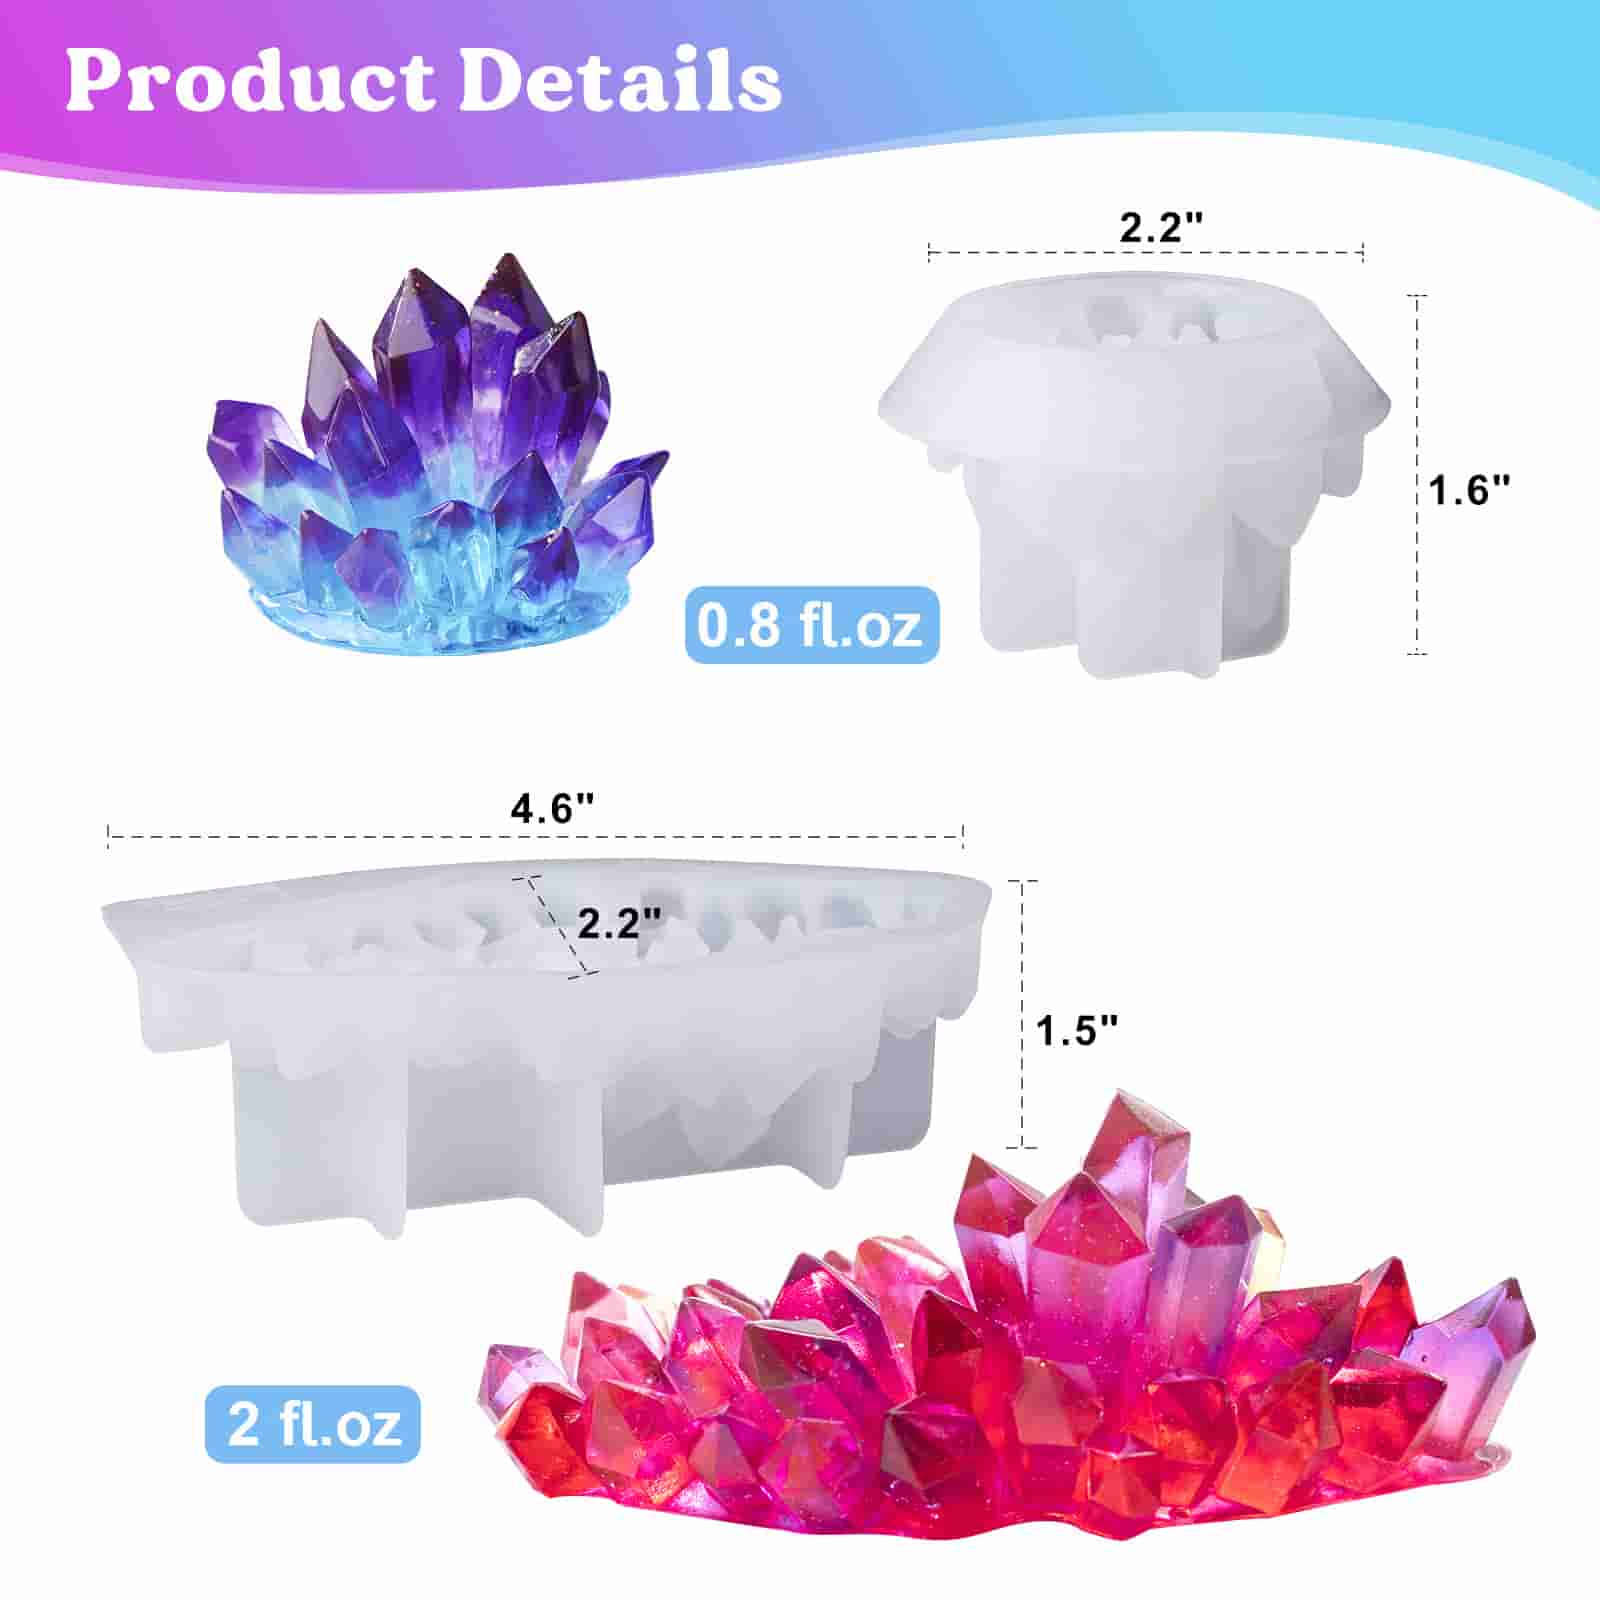 Resin Craft Makes 60 Crystals Small Crystal Stones Silicone Mold for Resin